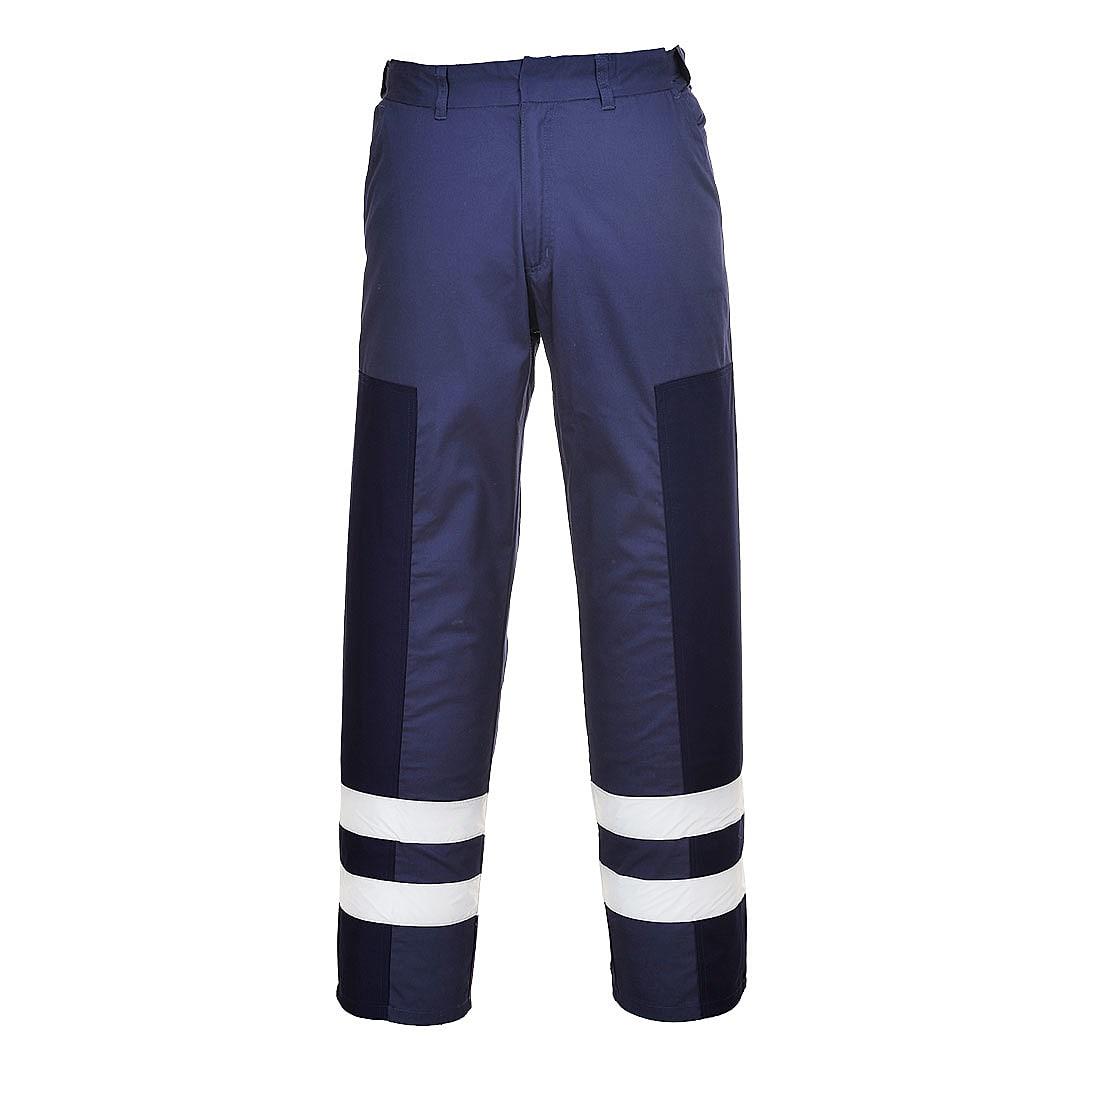 Portwest Ballistic Trousers in Navy (Product Code: S918)